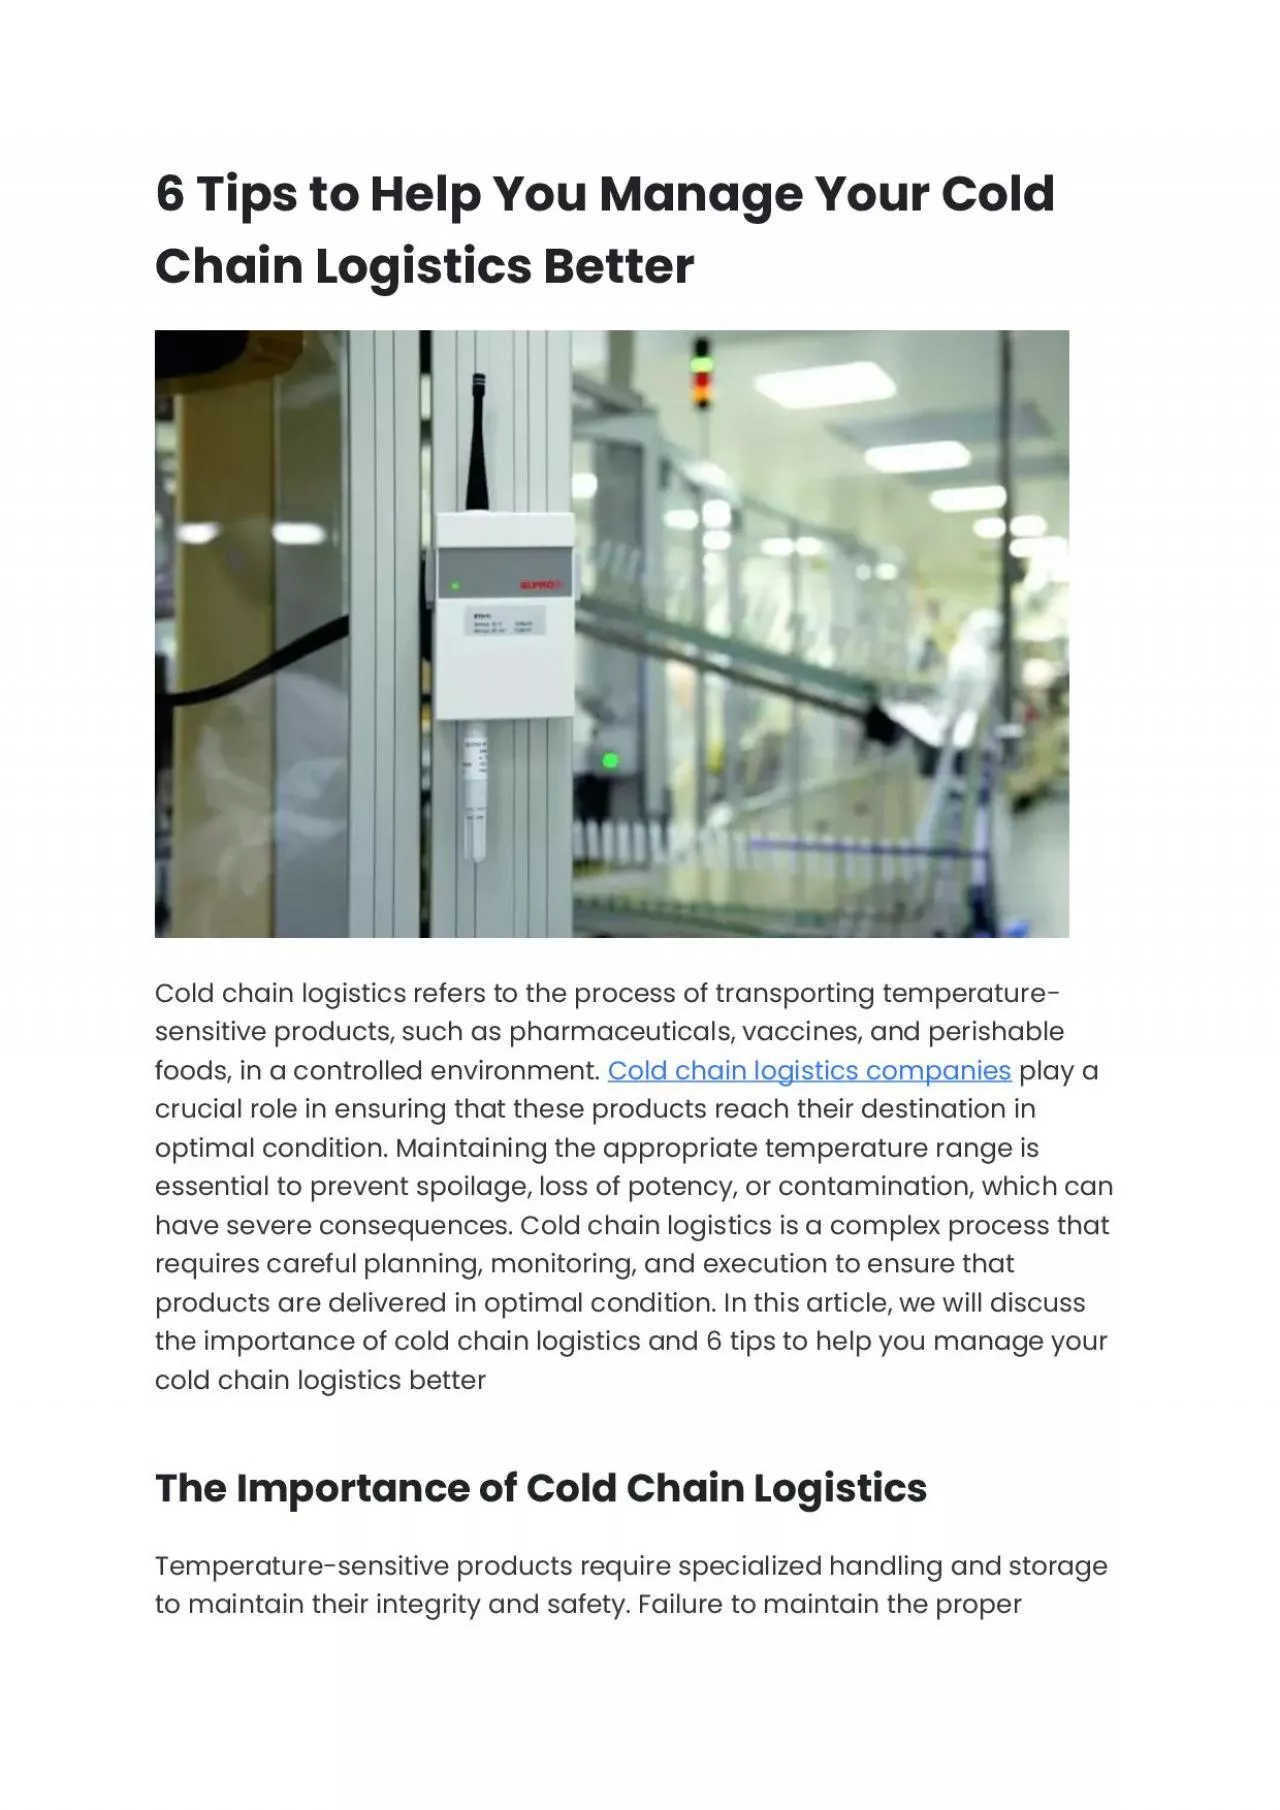 6 Tips to Help You Manage Your Cold Chain Logistics Better